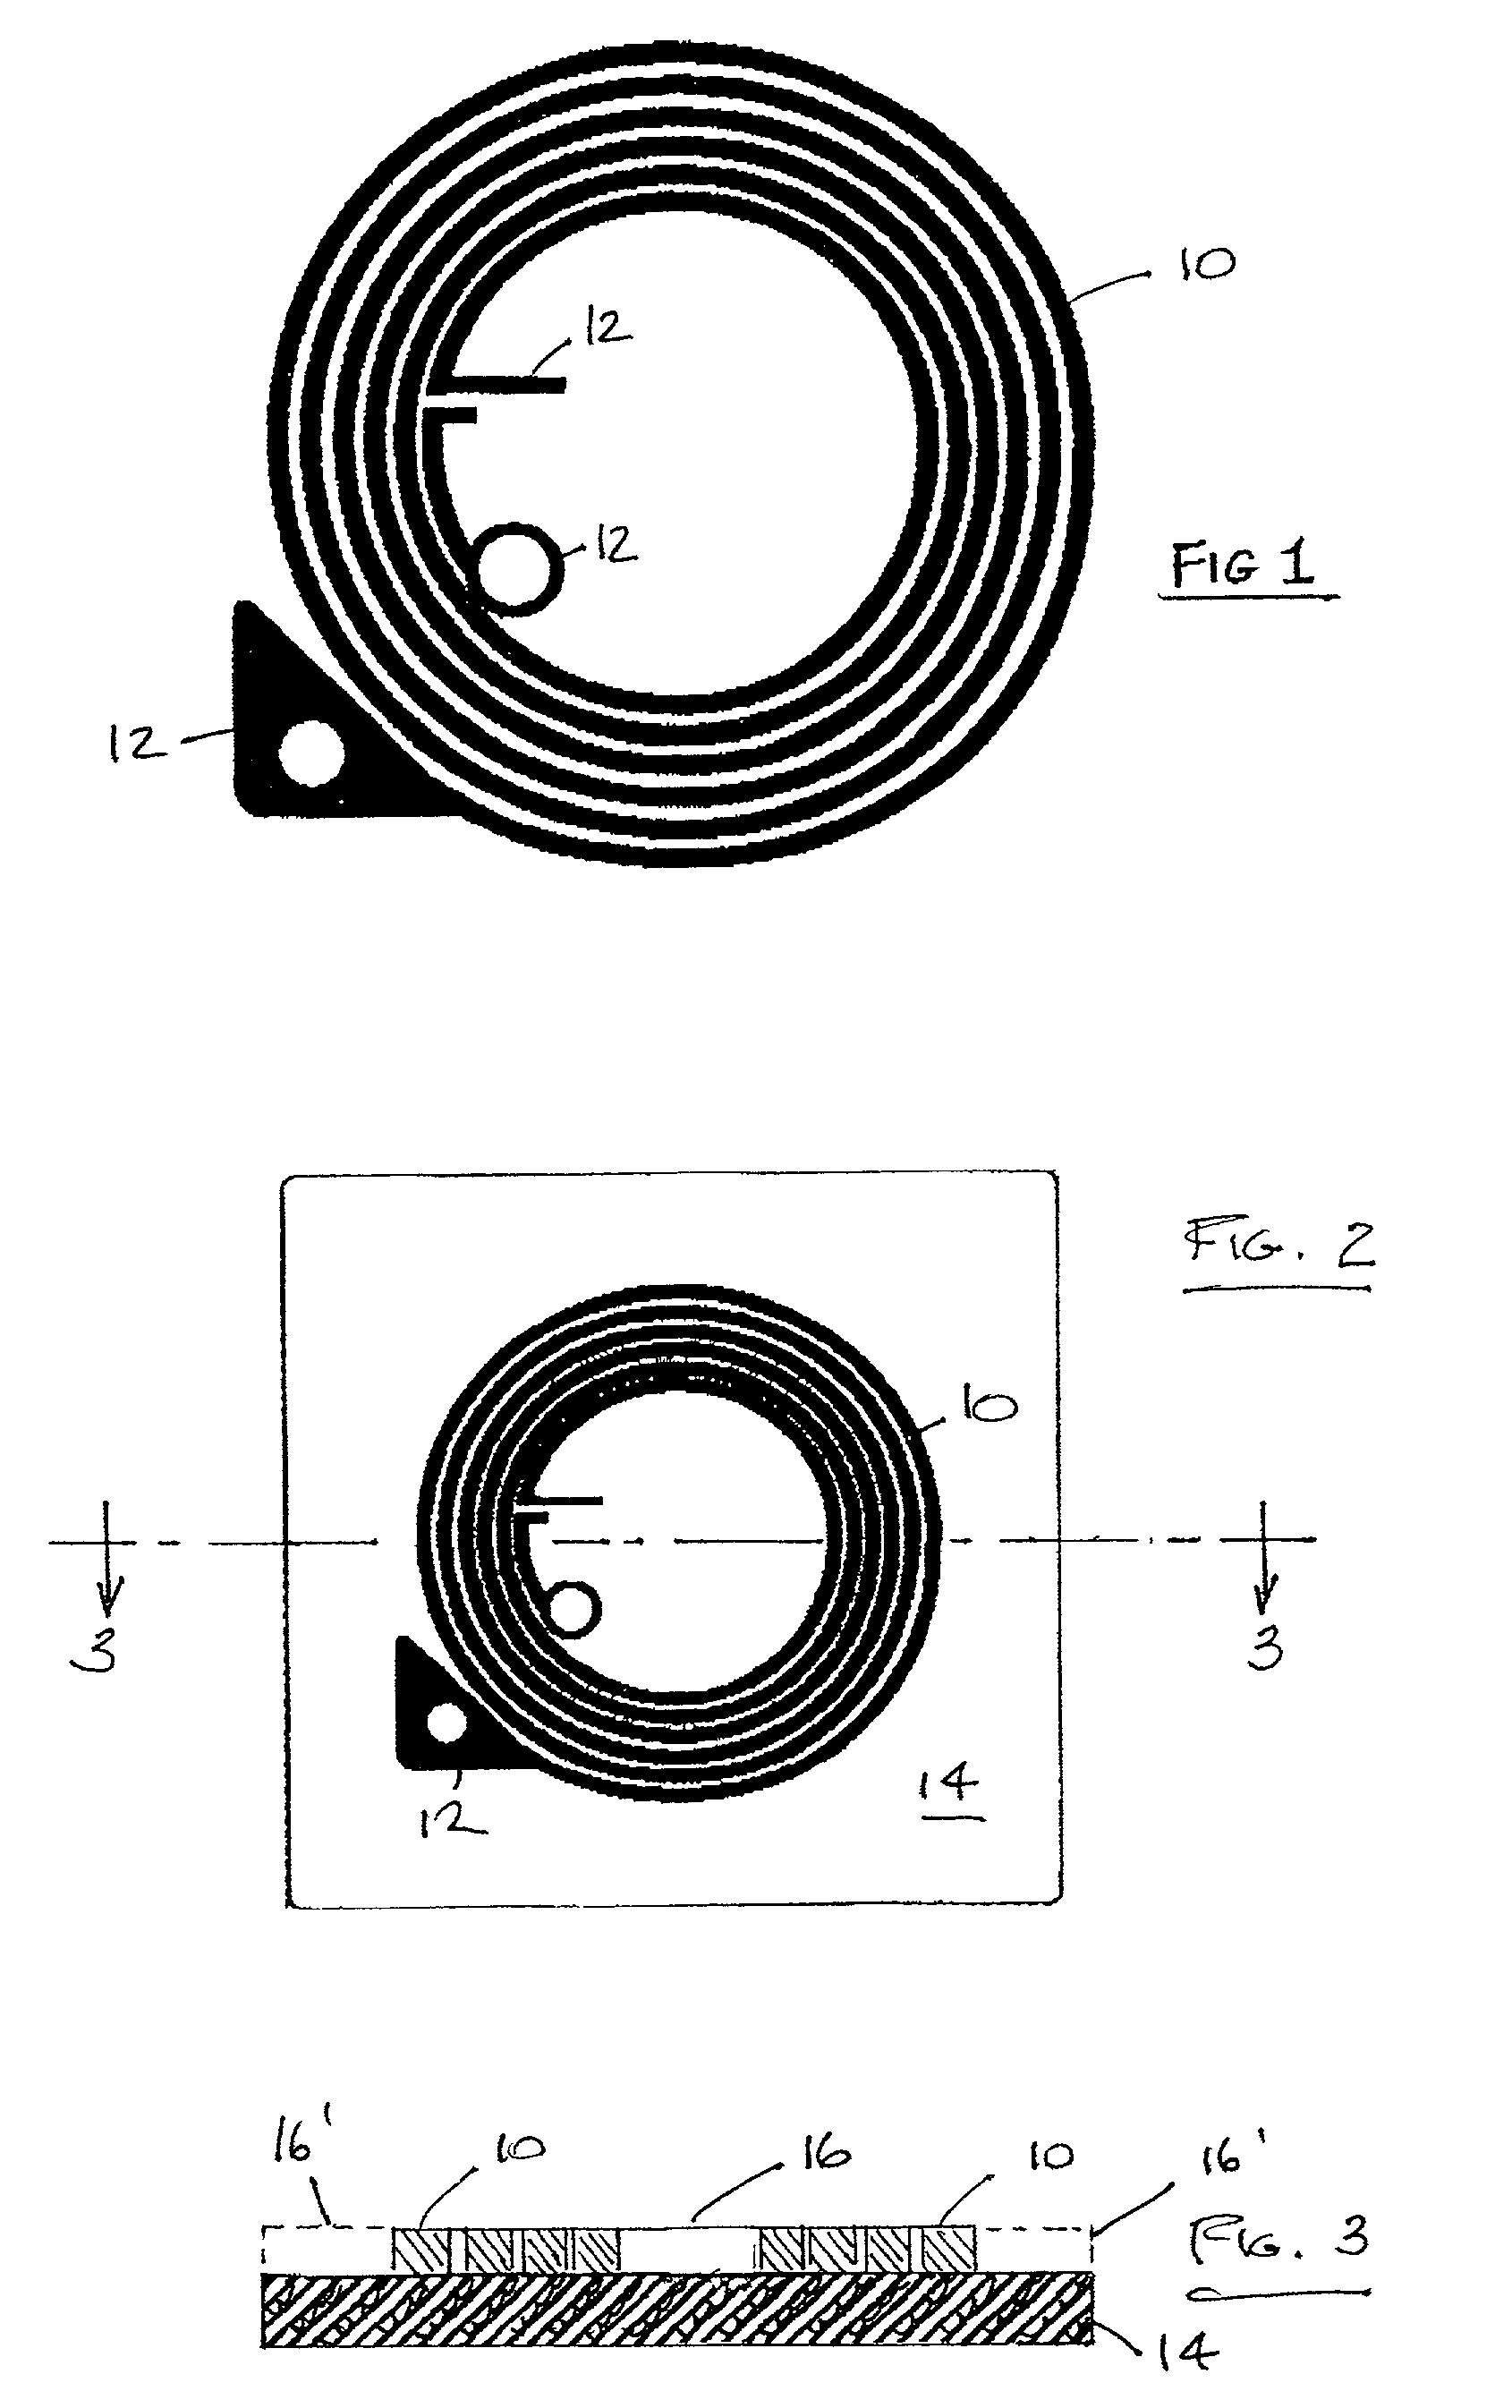 Method for the formation of RF antennas by demetallizing